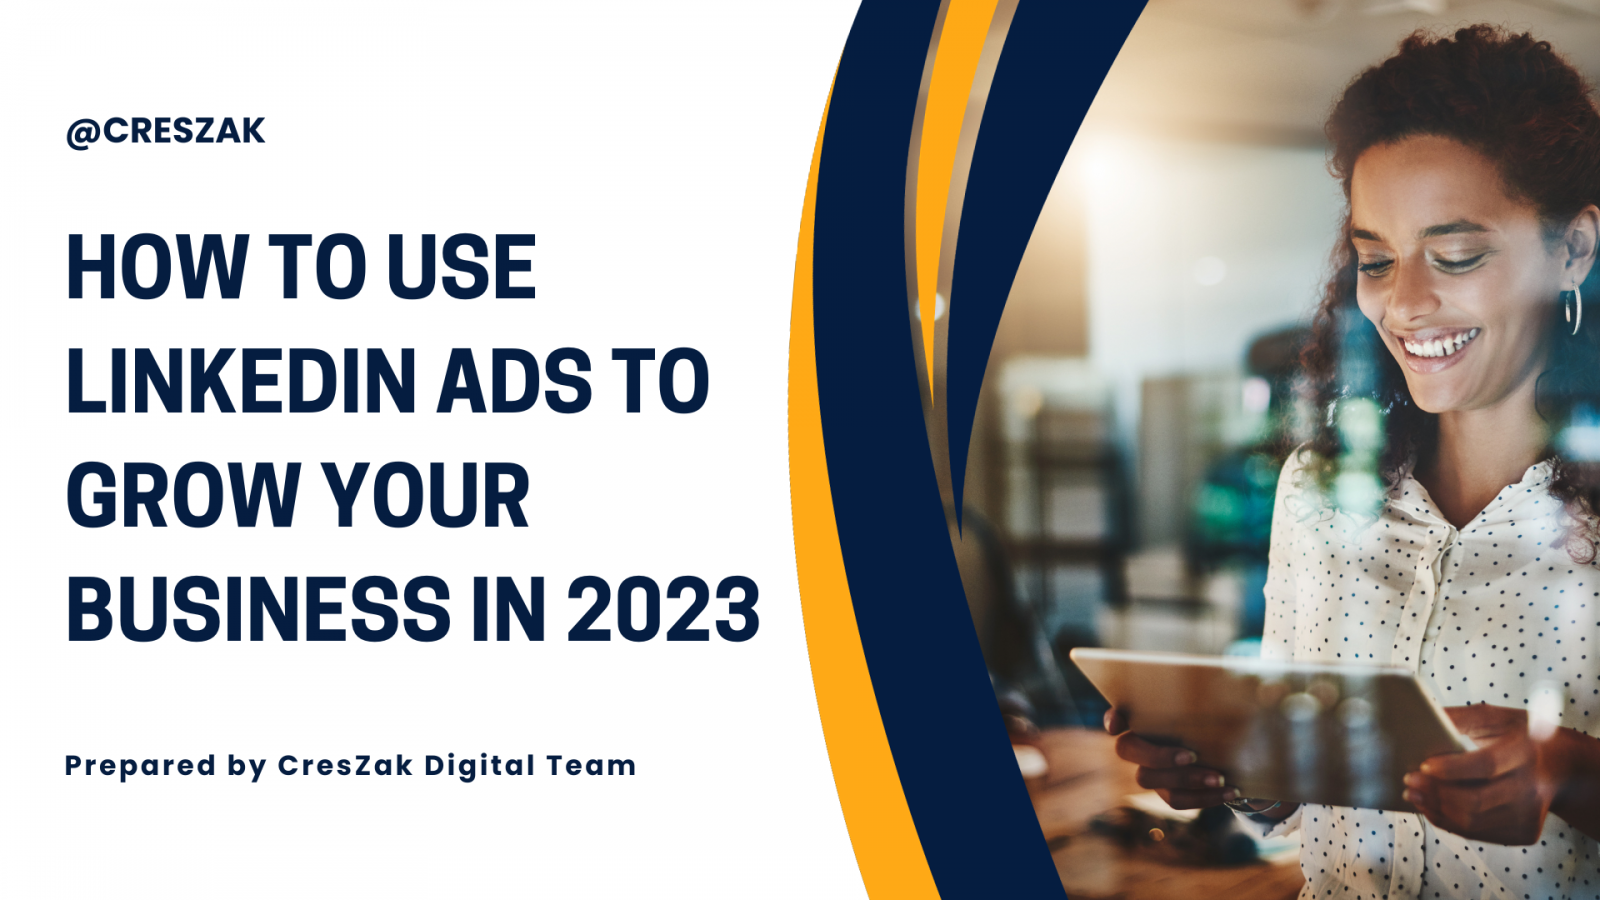 How to Use LinkedIn Ads to Grow Your Business in 2023